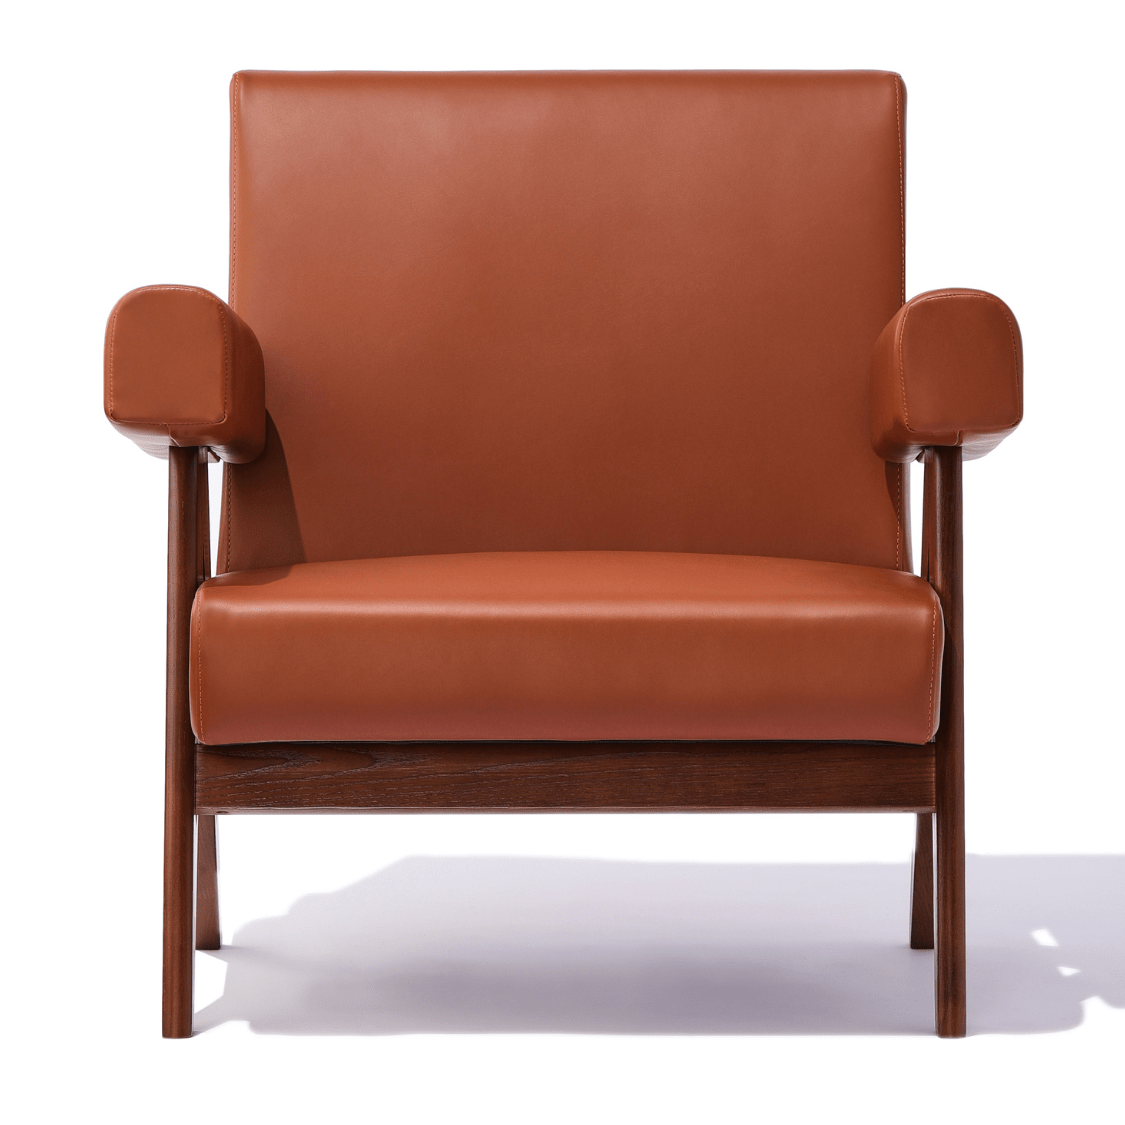 Pierre J Brown Soft Lounge Chair - Your Bar Stools Canada